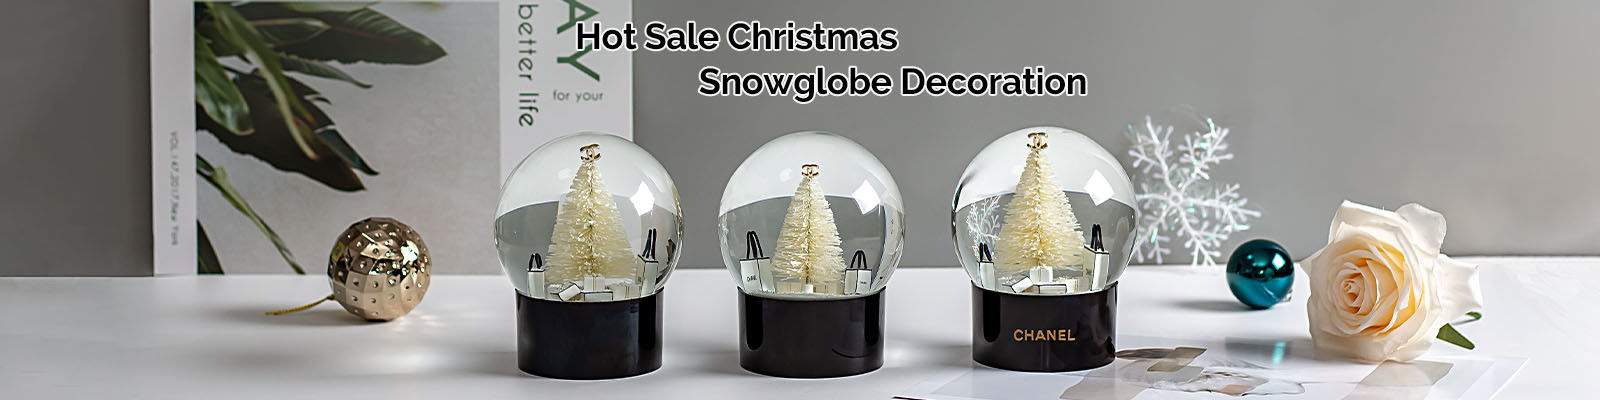 Lighted Musical Snow Globes